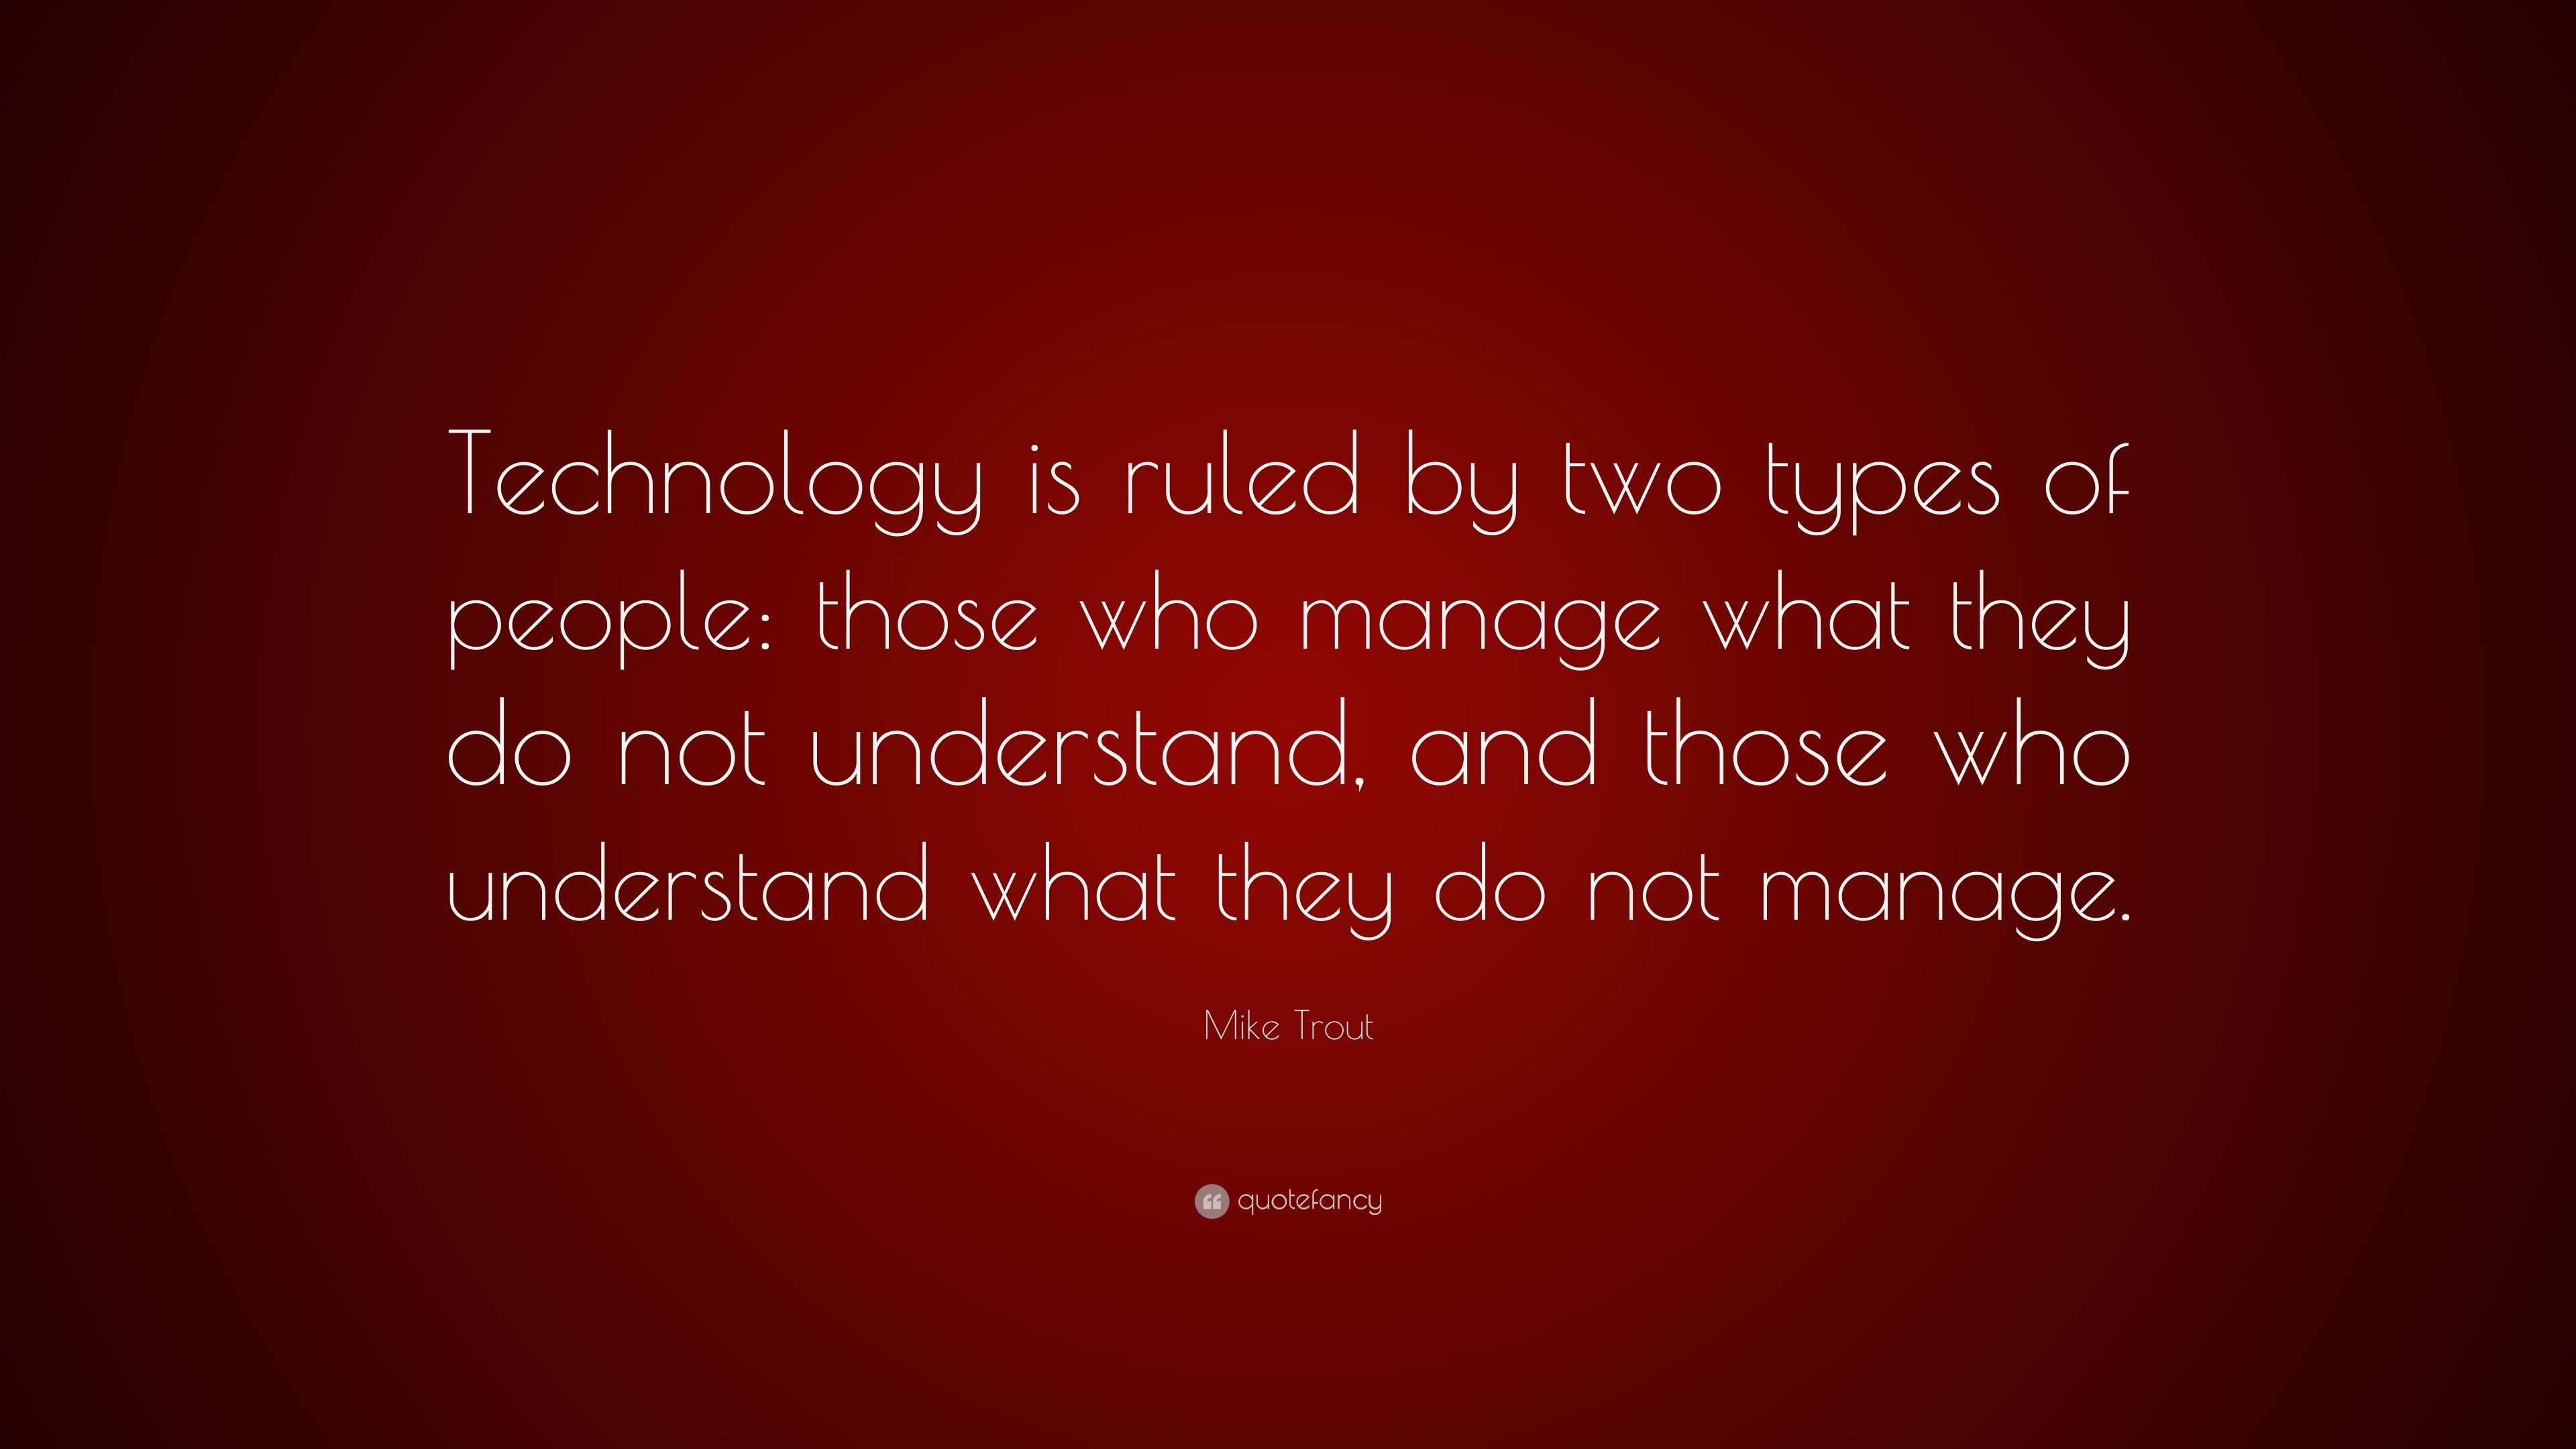 Mike Trout Quote: “Technology is ruled by two types of people: those ...